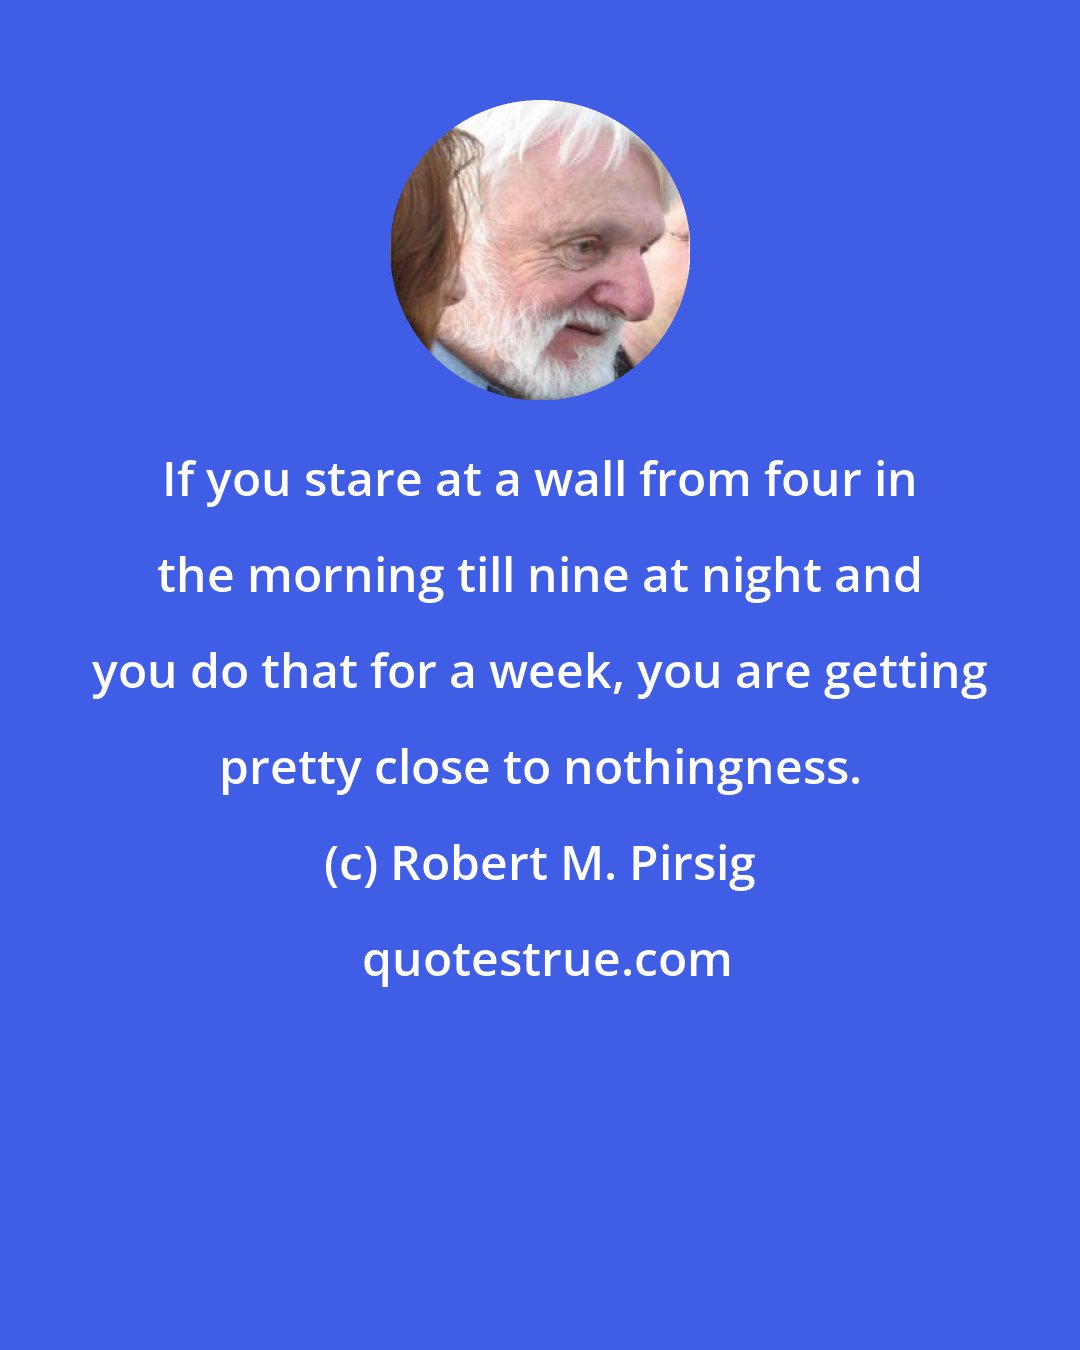 Robert M. Pirsig: If you stare at a wall from four in the morning till nine at night and you do that for a week, you are getting pretty close to nothingness.